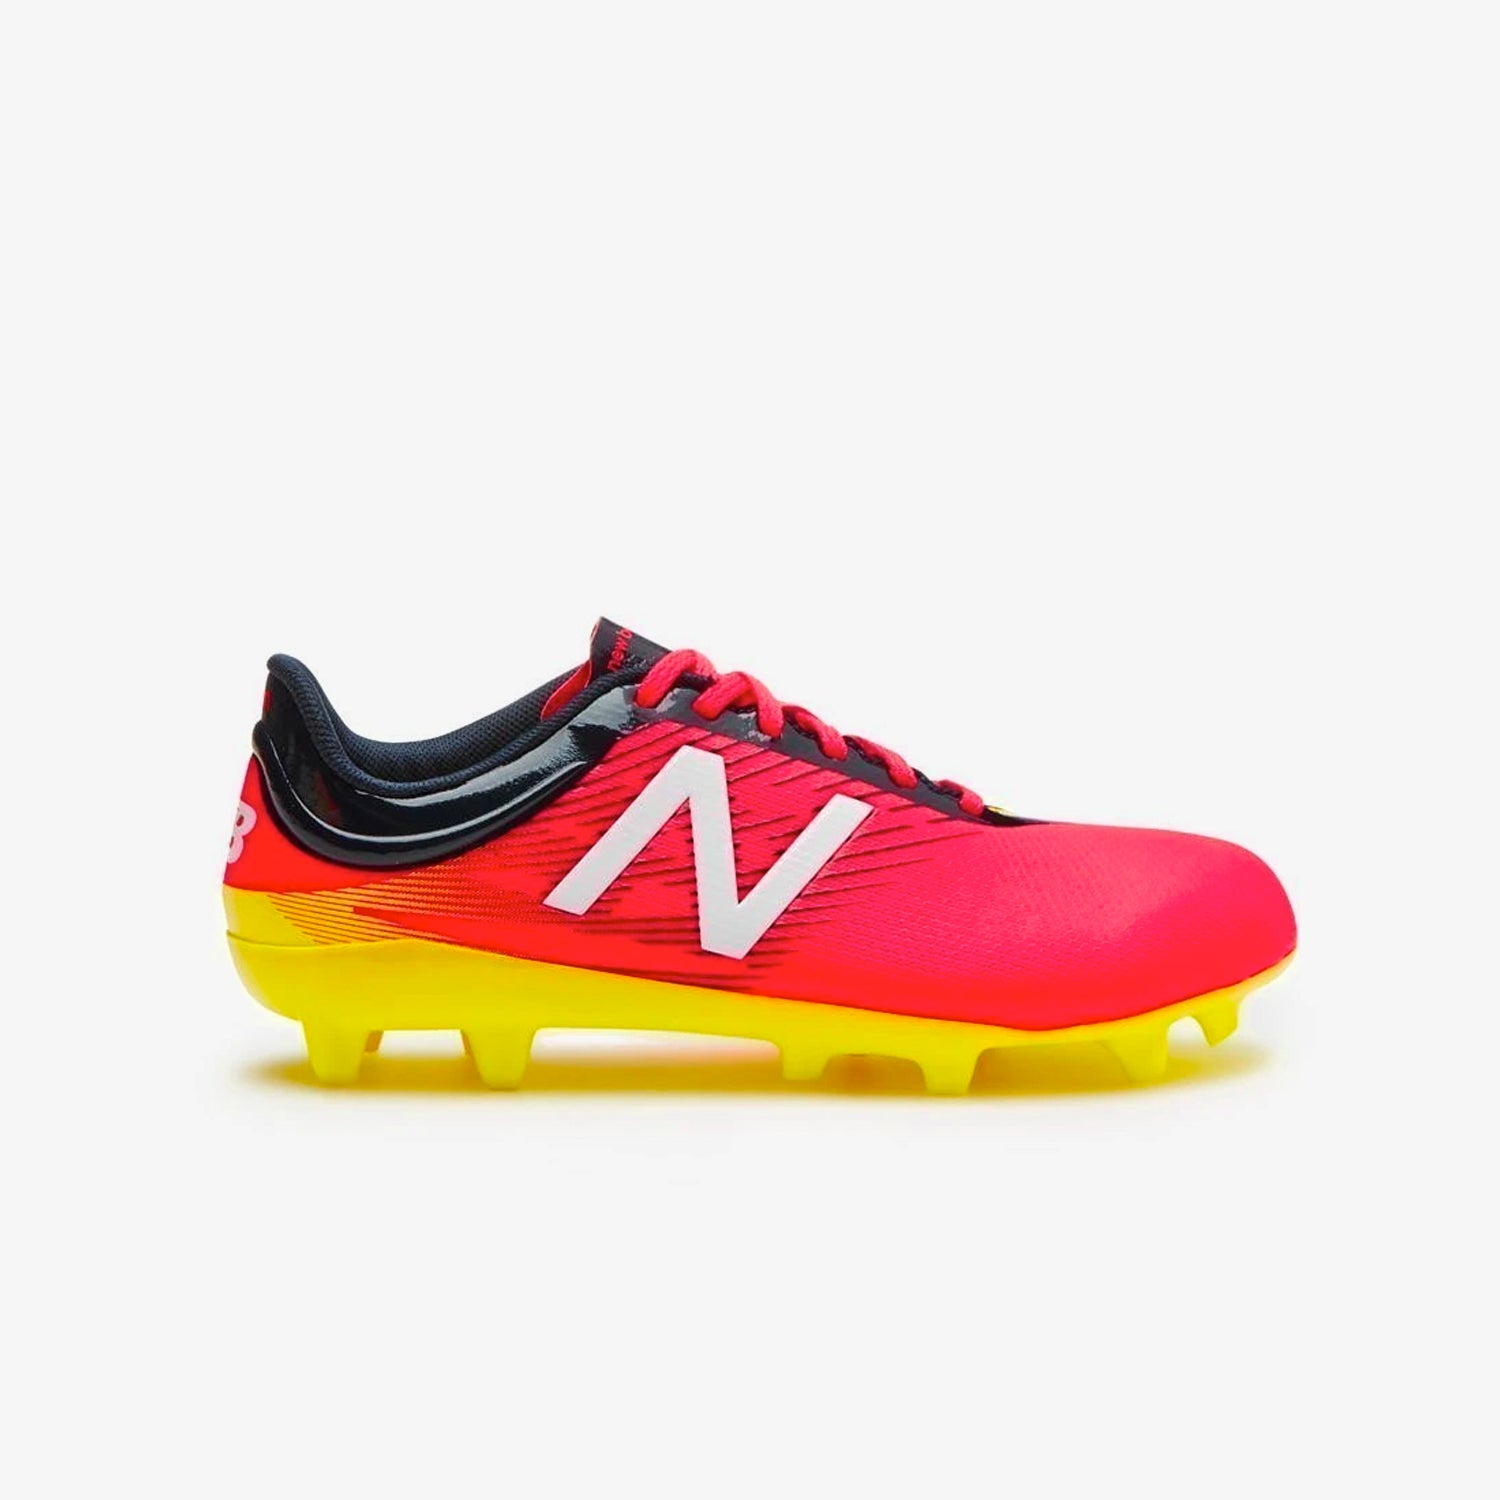 Kid's Furon 2.0 Dispatch Firm-Ground Soccer Cleats